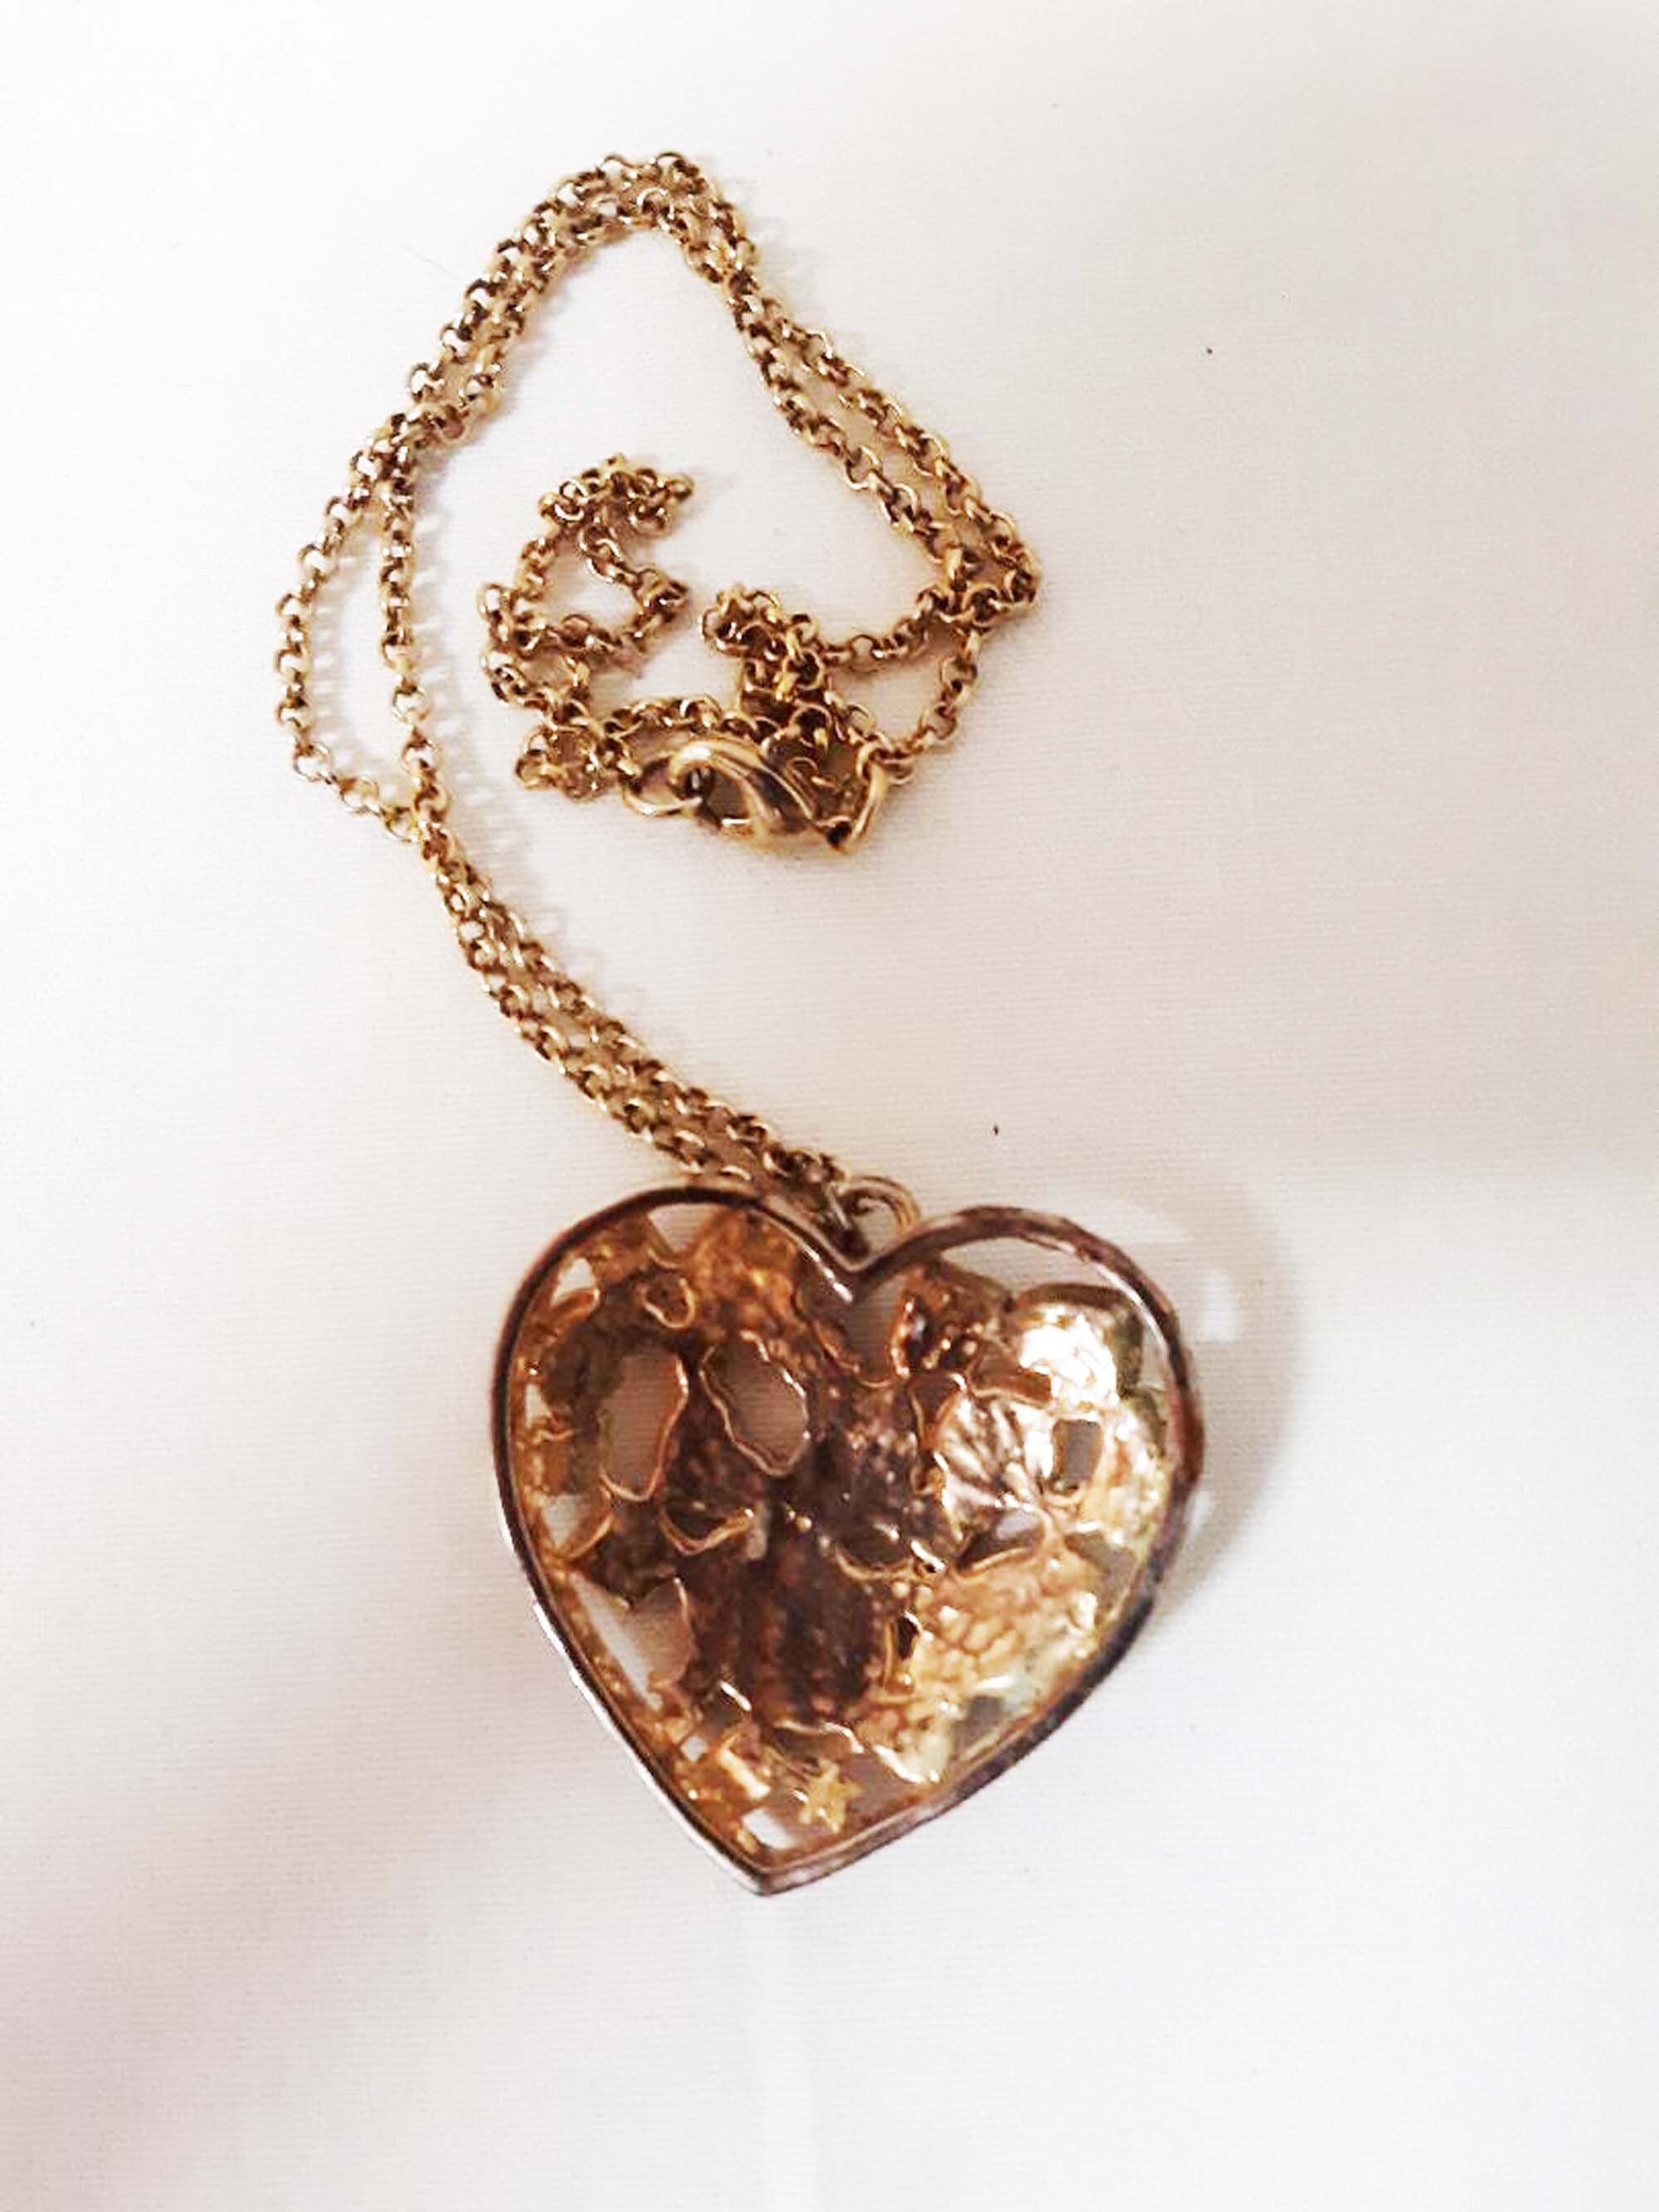 Vintage Heart Pendant and Chain Gold Tone With Colorful Faux - Etsy